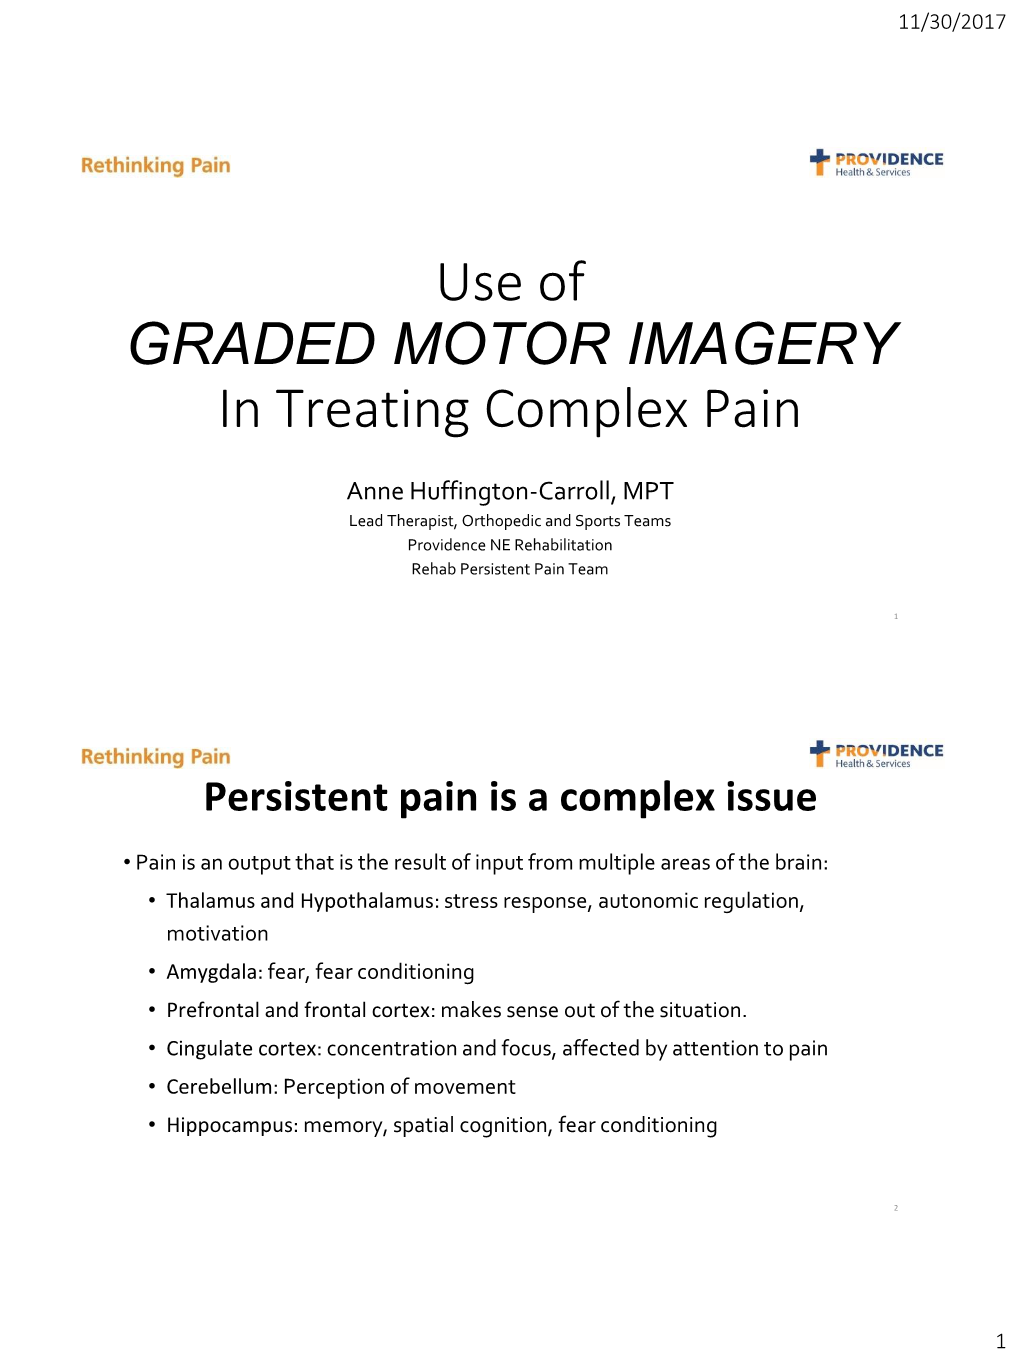 GRADED MOTOR IMAGERY in Treating Complex Pain